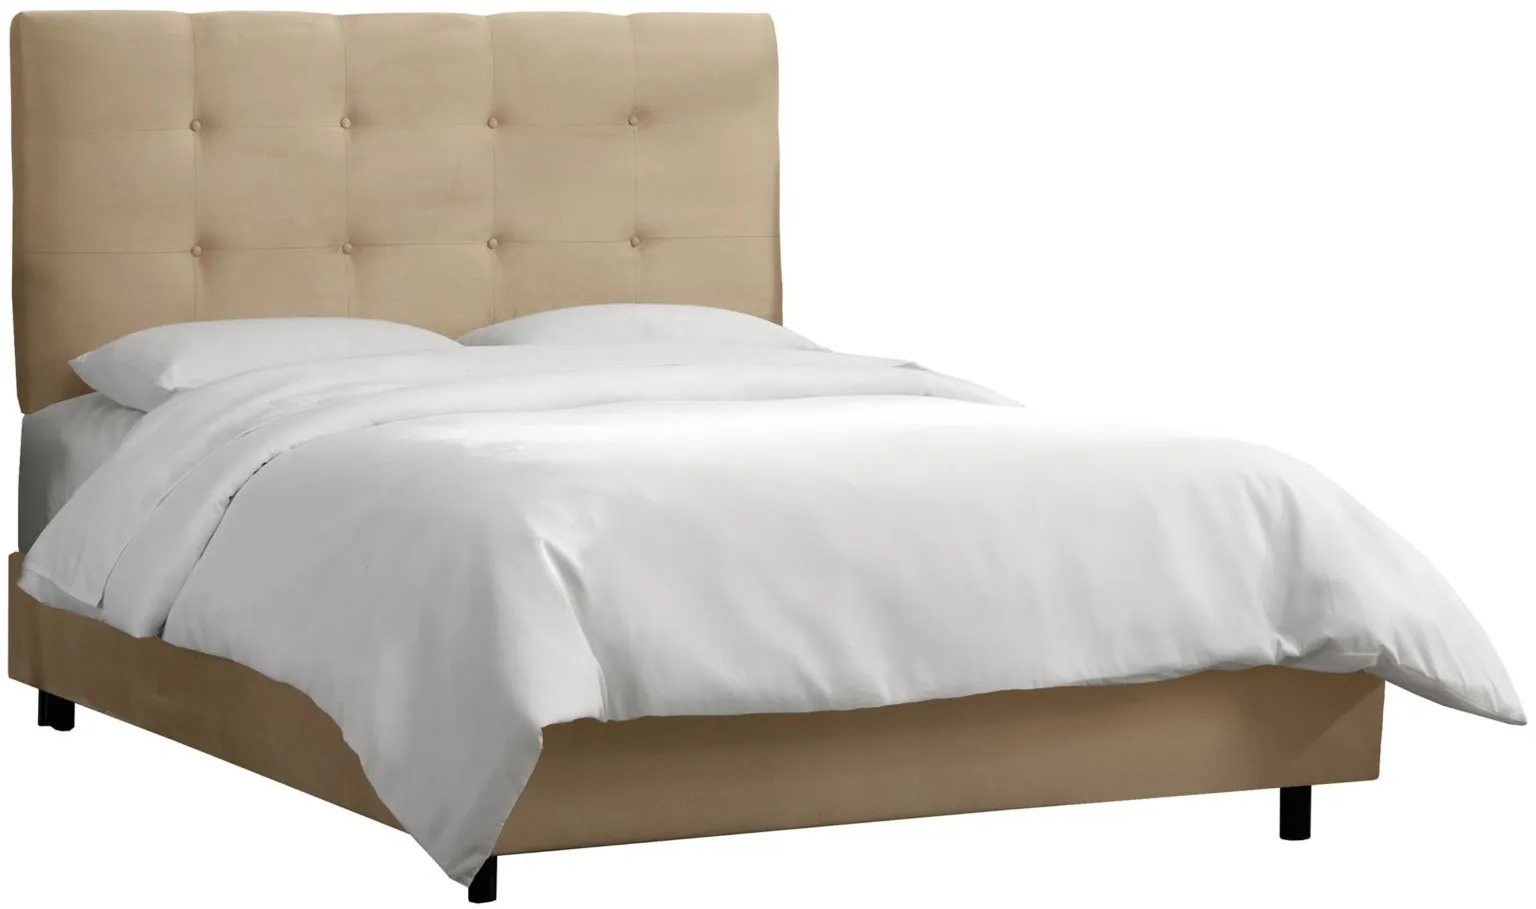 Nathan Bed in Premier Oatmeal by Skyline